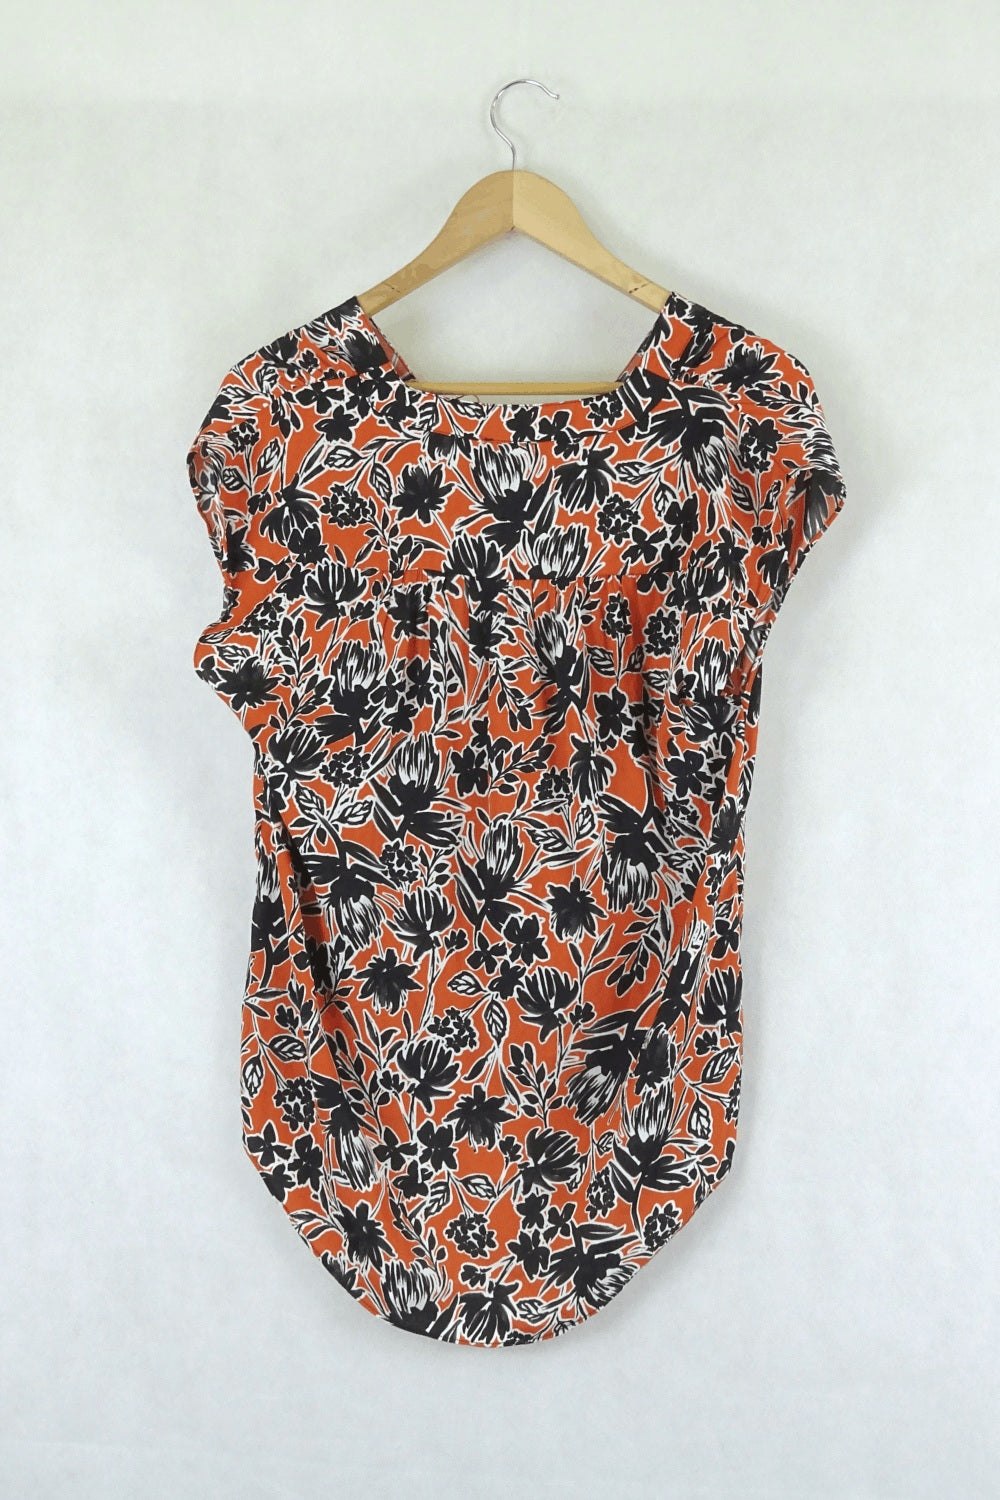 Witchery Coral Floral Print Sleeveless Blouse 8